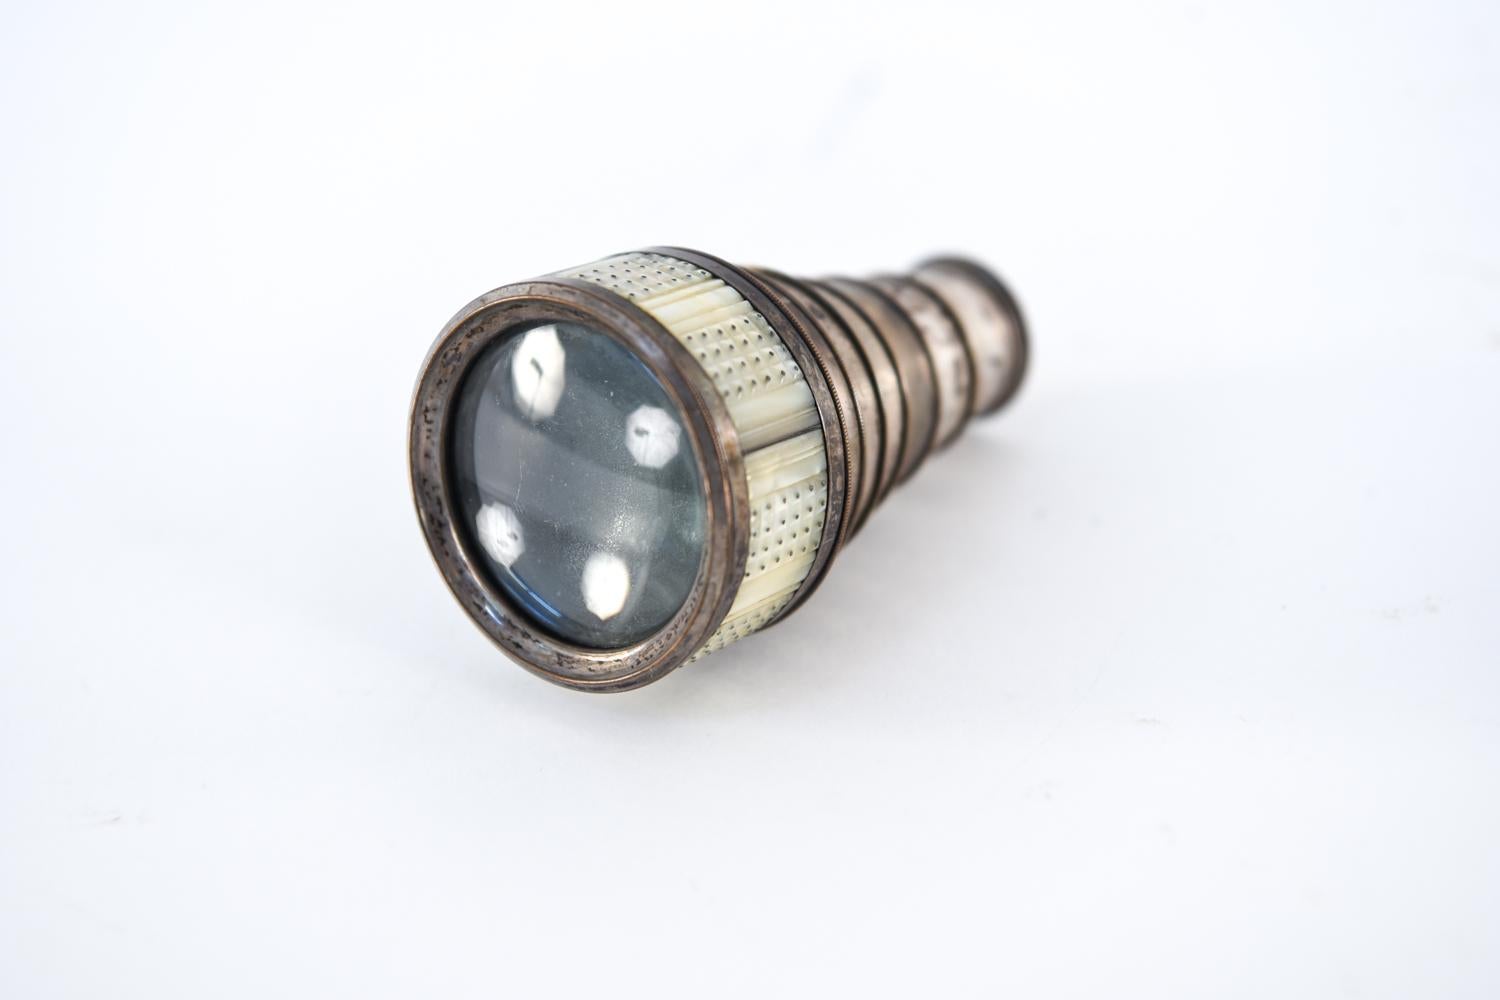 This miniature spyglass - also called a monocular pocket telescope - dates to the early 19th century and features lovely silver-beaded mother of pearl inlay. Case unscrews below 4th and 7th draws for cleaning and lens replacement. Apparently